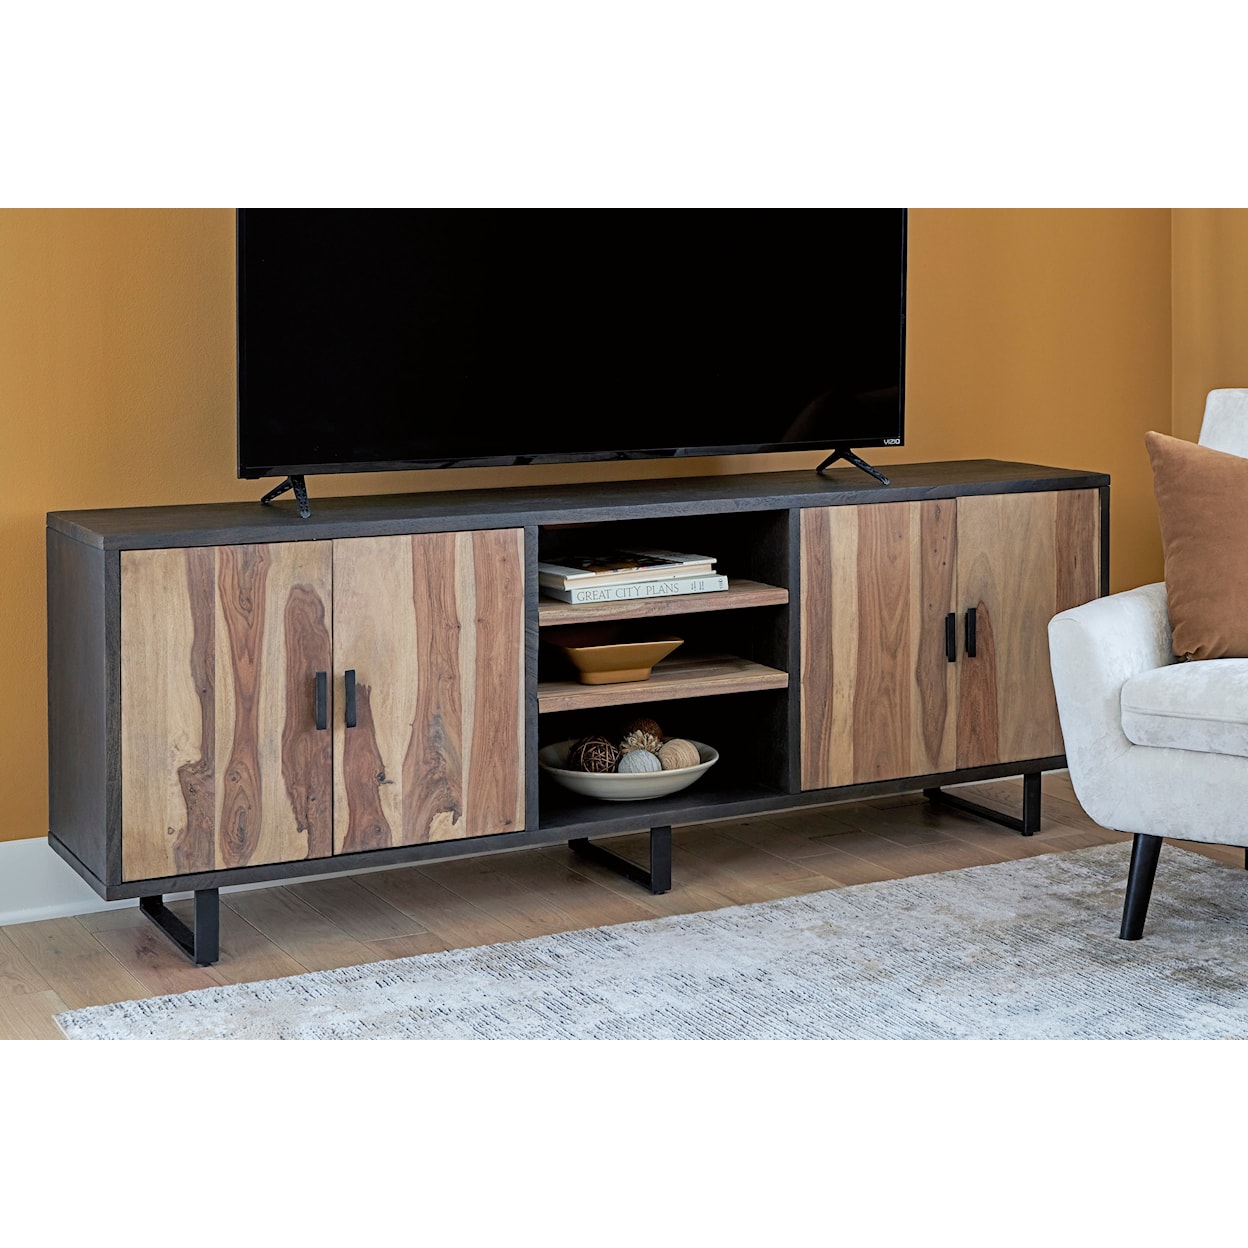 Benchcraft Bellwick Casual TV Stand